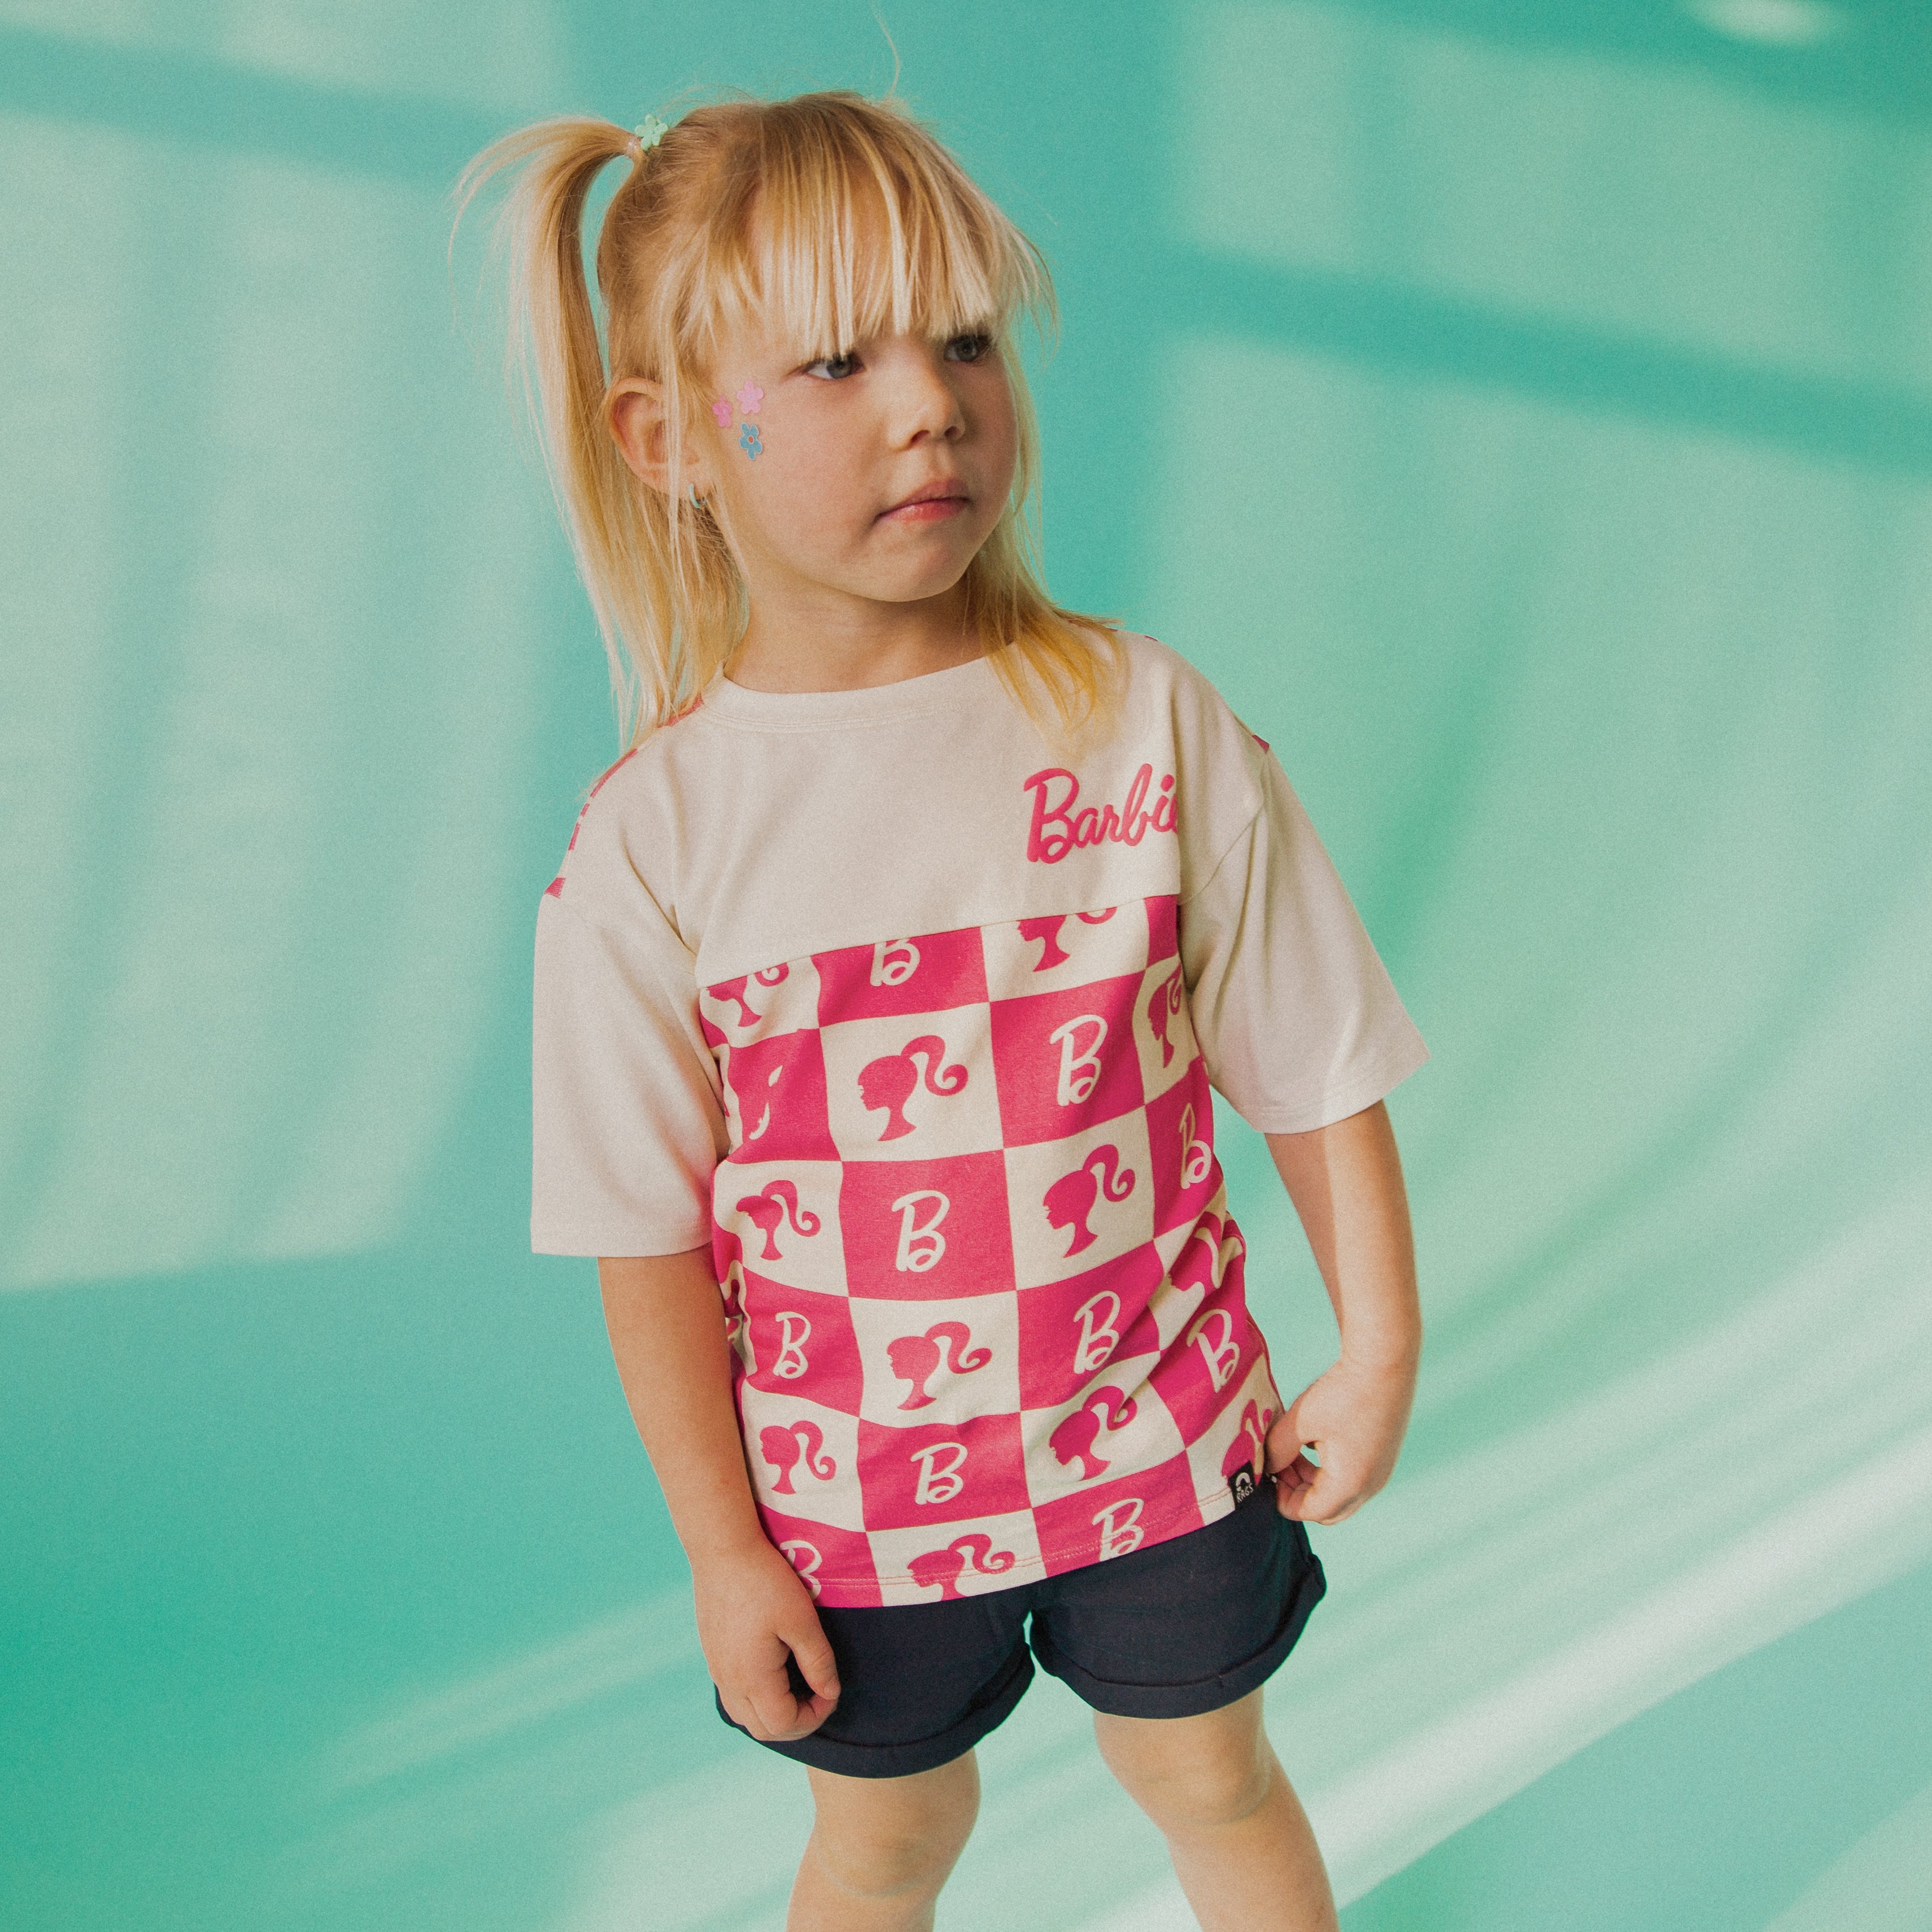 Drop Shoulder Tee - Barbie Check - Mattel Barbie Collection by RAGS